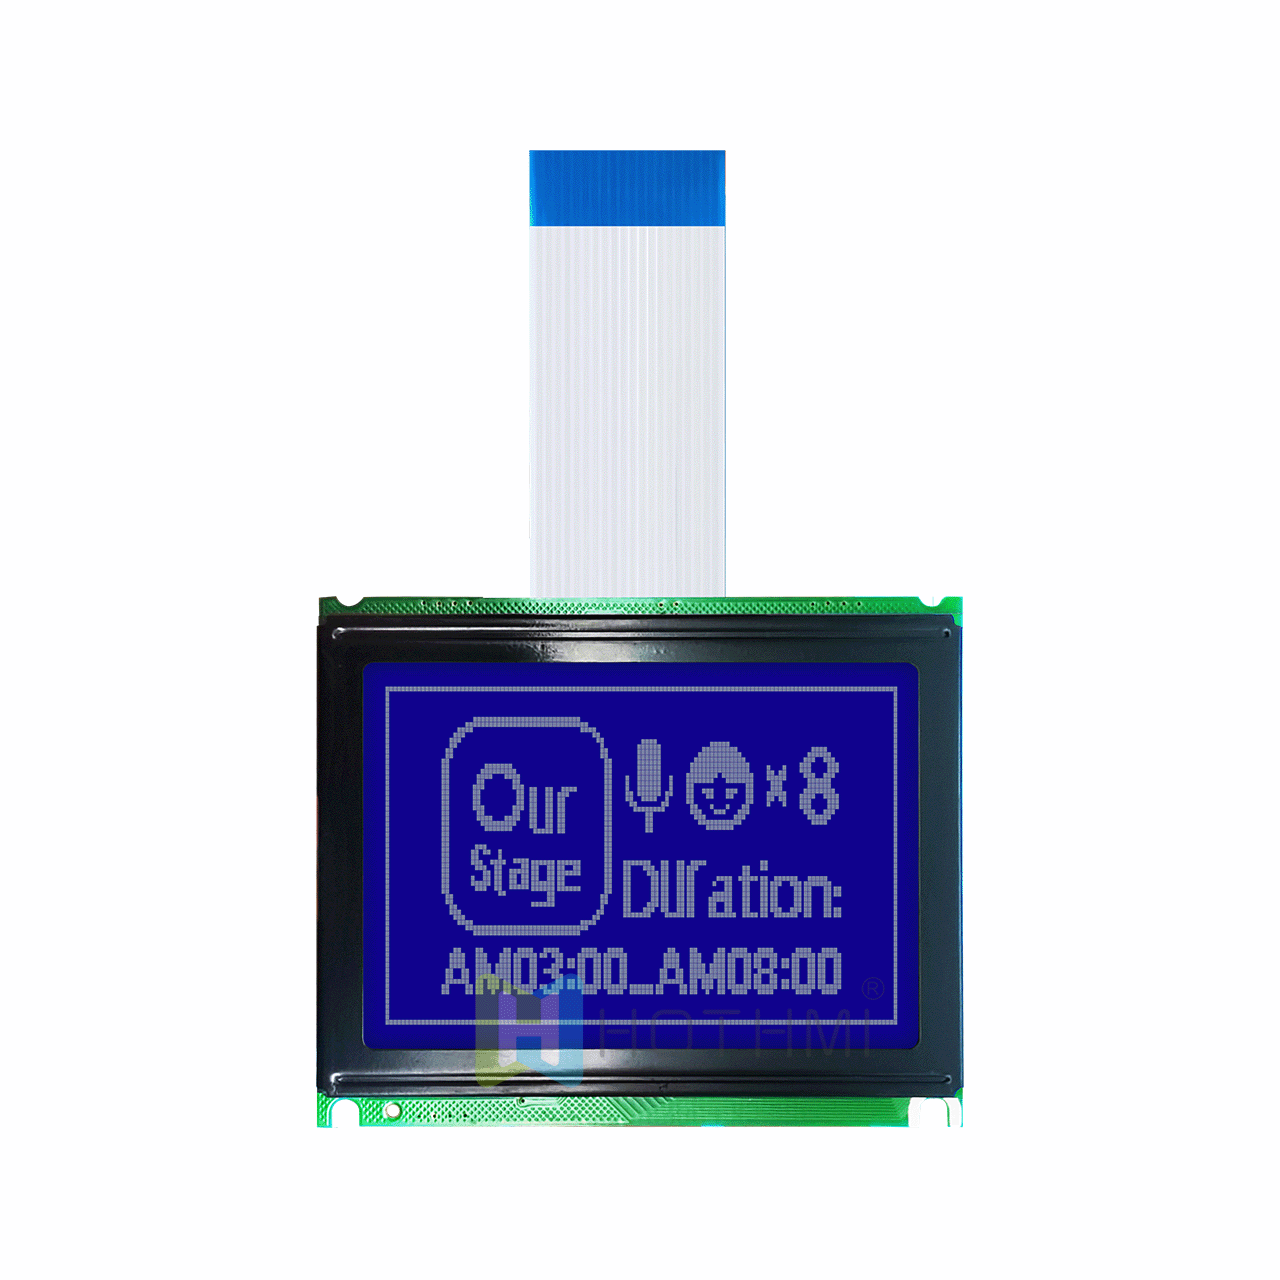 3 inch 128x64 LCD Graphic Display Module | 12864 Graphic LCD Module | STN Negative Display | White Backlight | White on Blue | Fully Transparent Polarizer